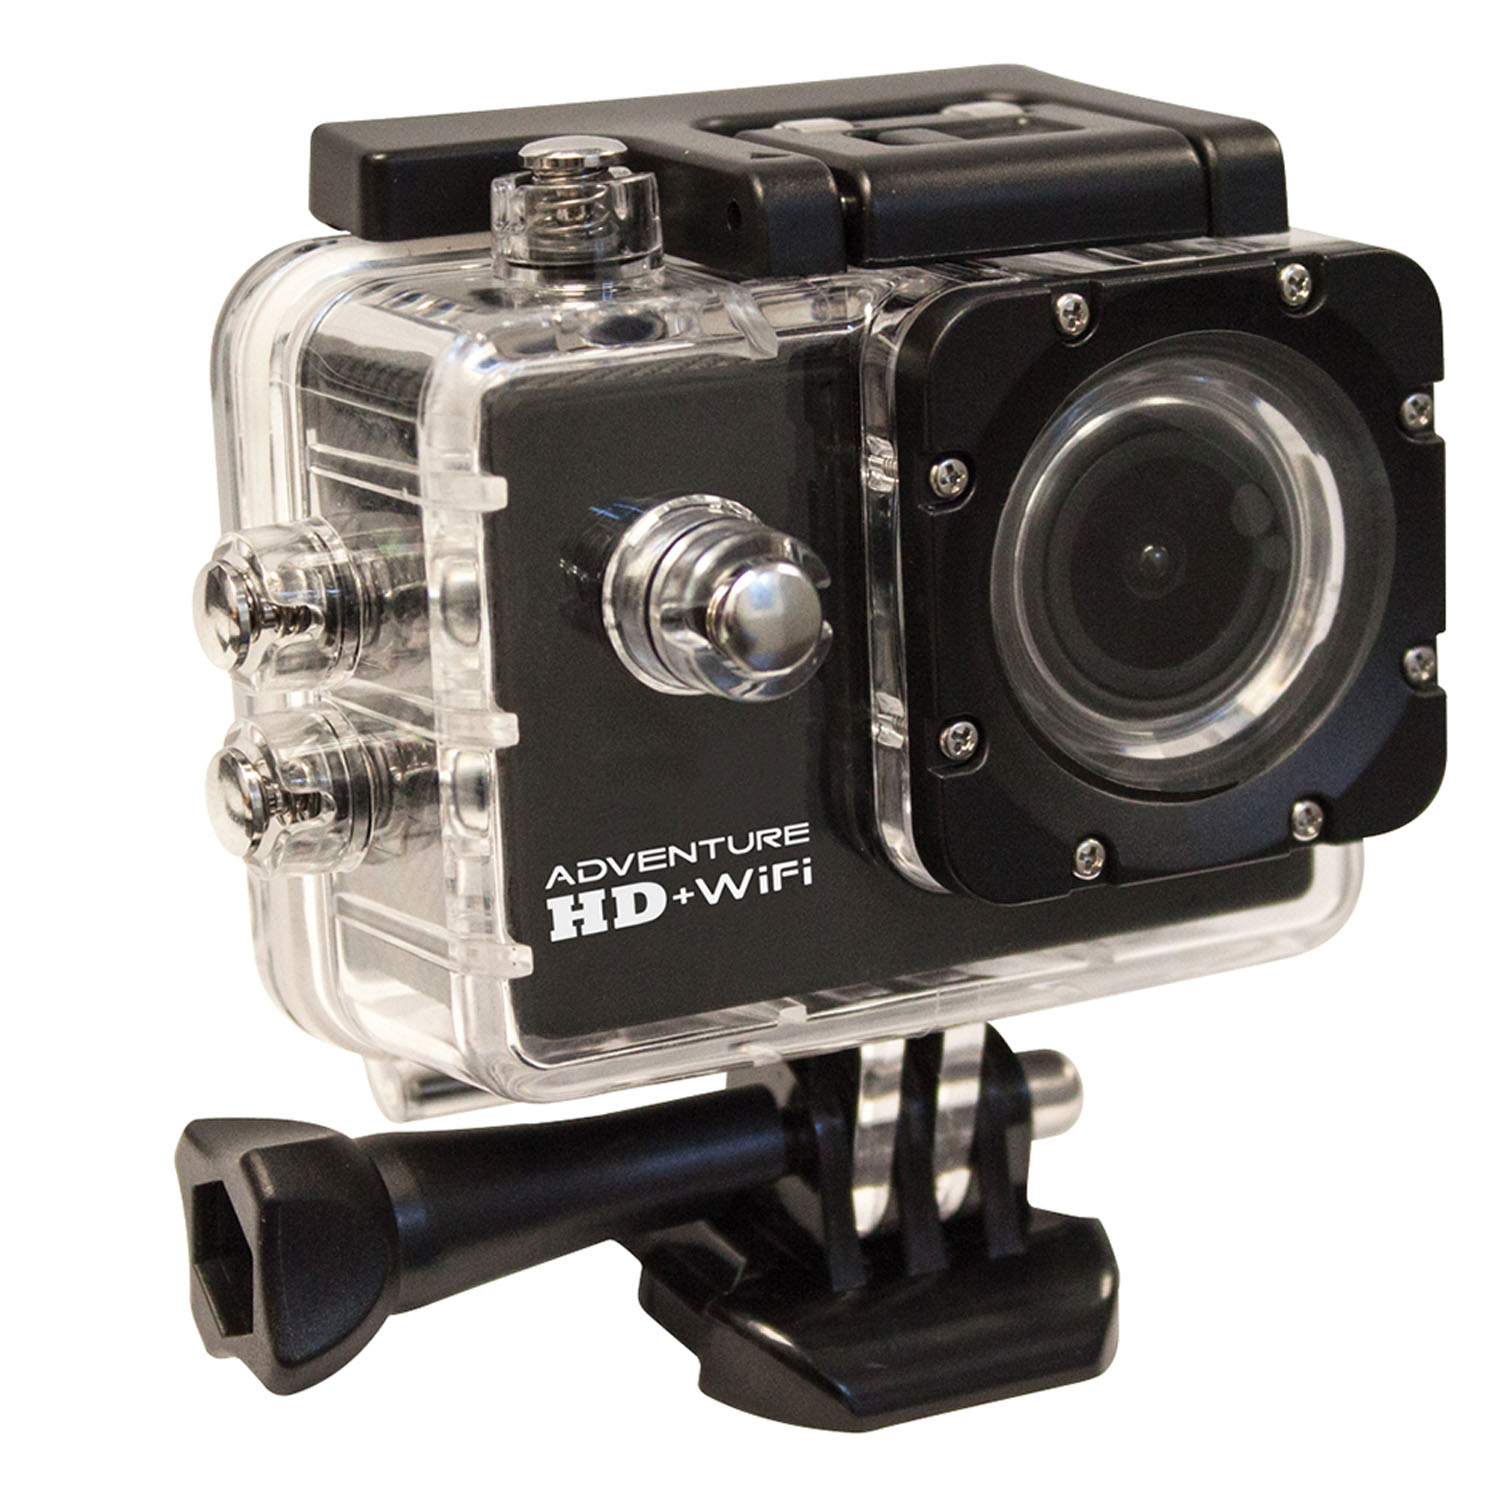 W5210 Wasp 12 Mega Pixel Waterproof (98 Feet) Sports Action Camera With 150 Degree Wide Angle Lens, 1.5" Lcd Display & Wi-Fi